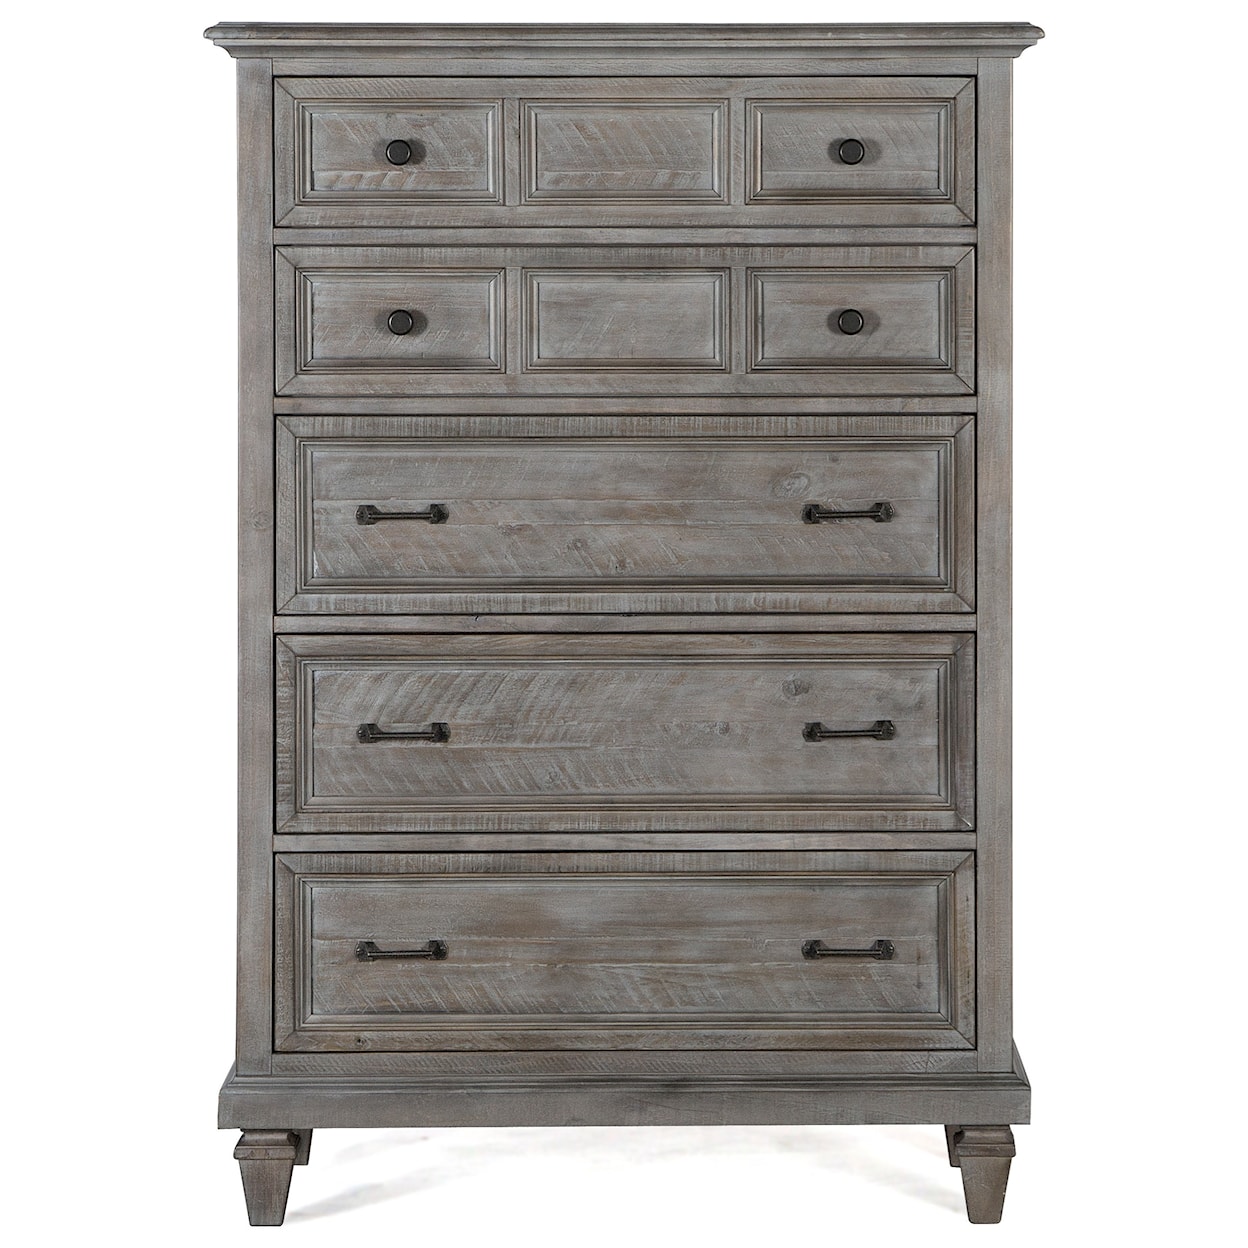 Magnussen Home Lancaster Bedroom Chest of Drawers